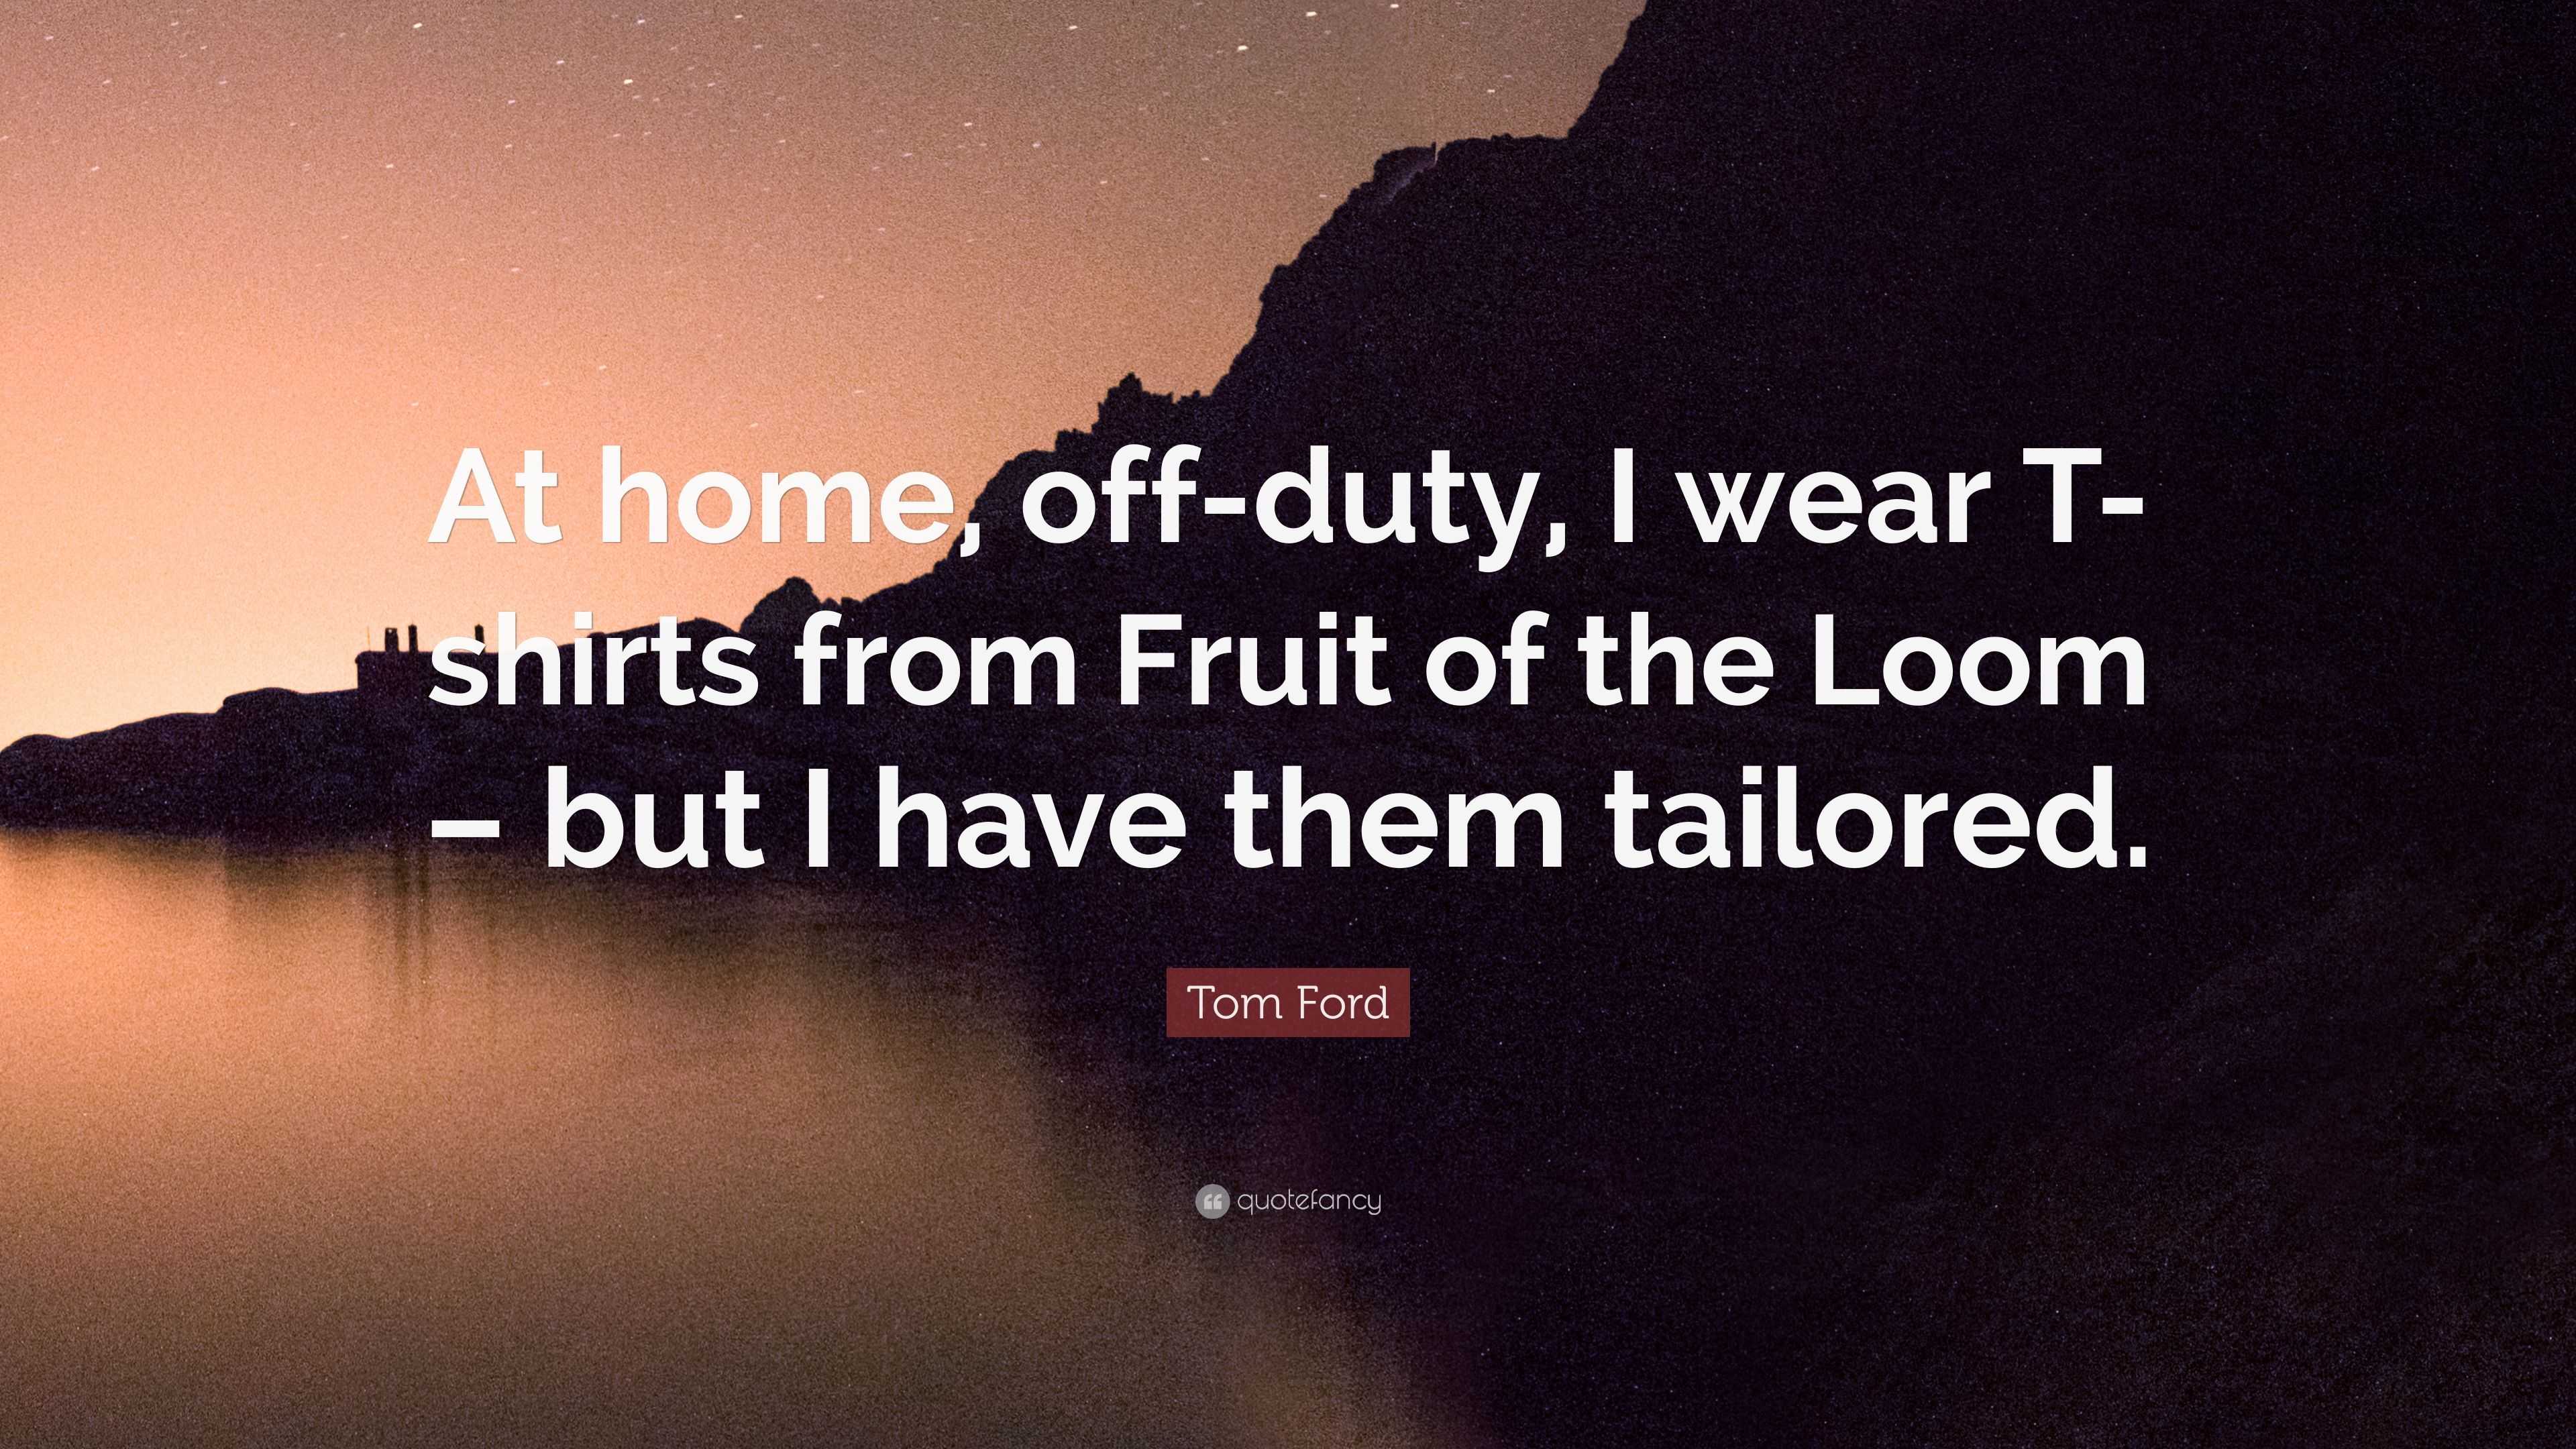 Tom Ford Quote: “At home, off-duty, I wear T-shirts from Fruit of the Loom –